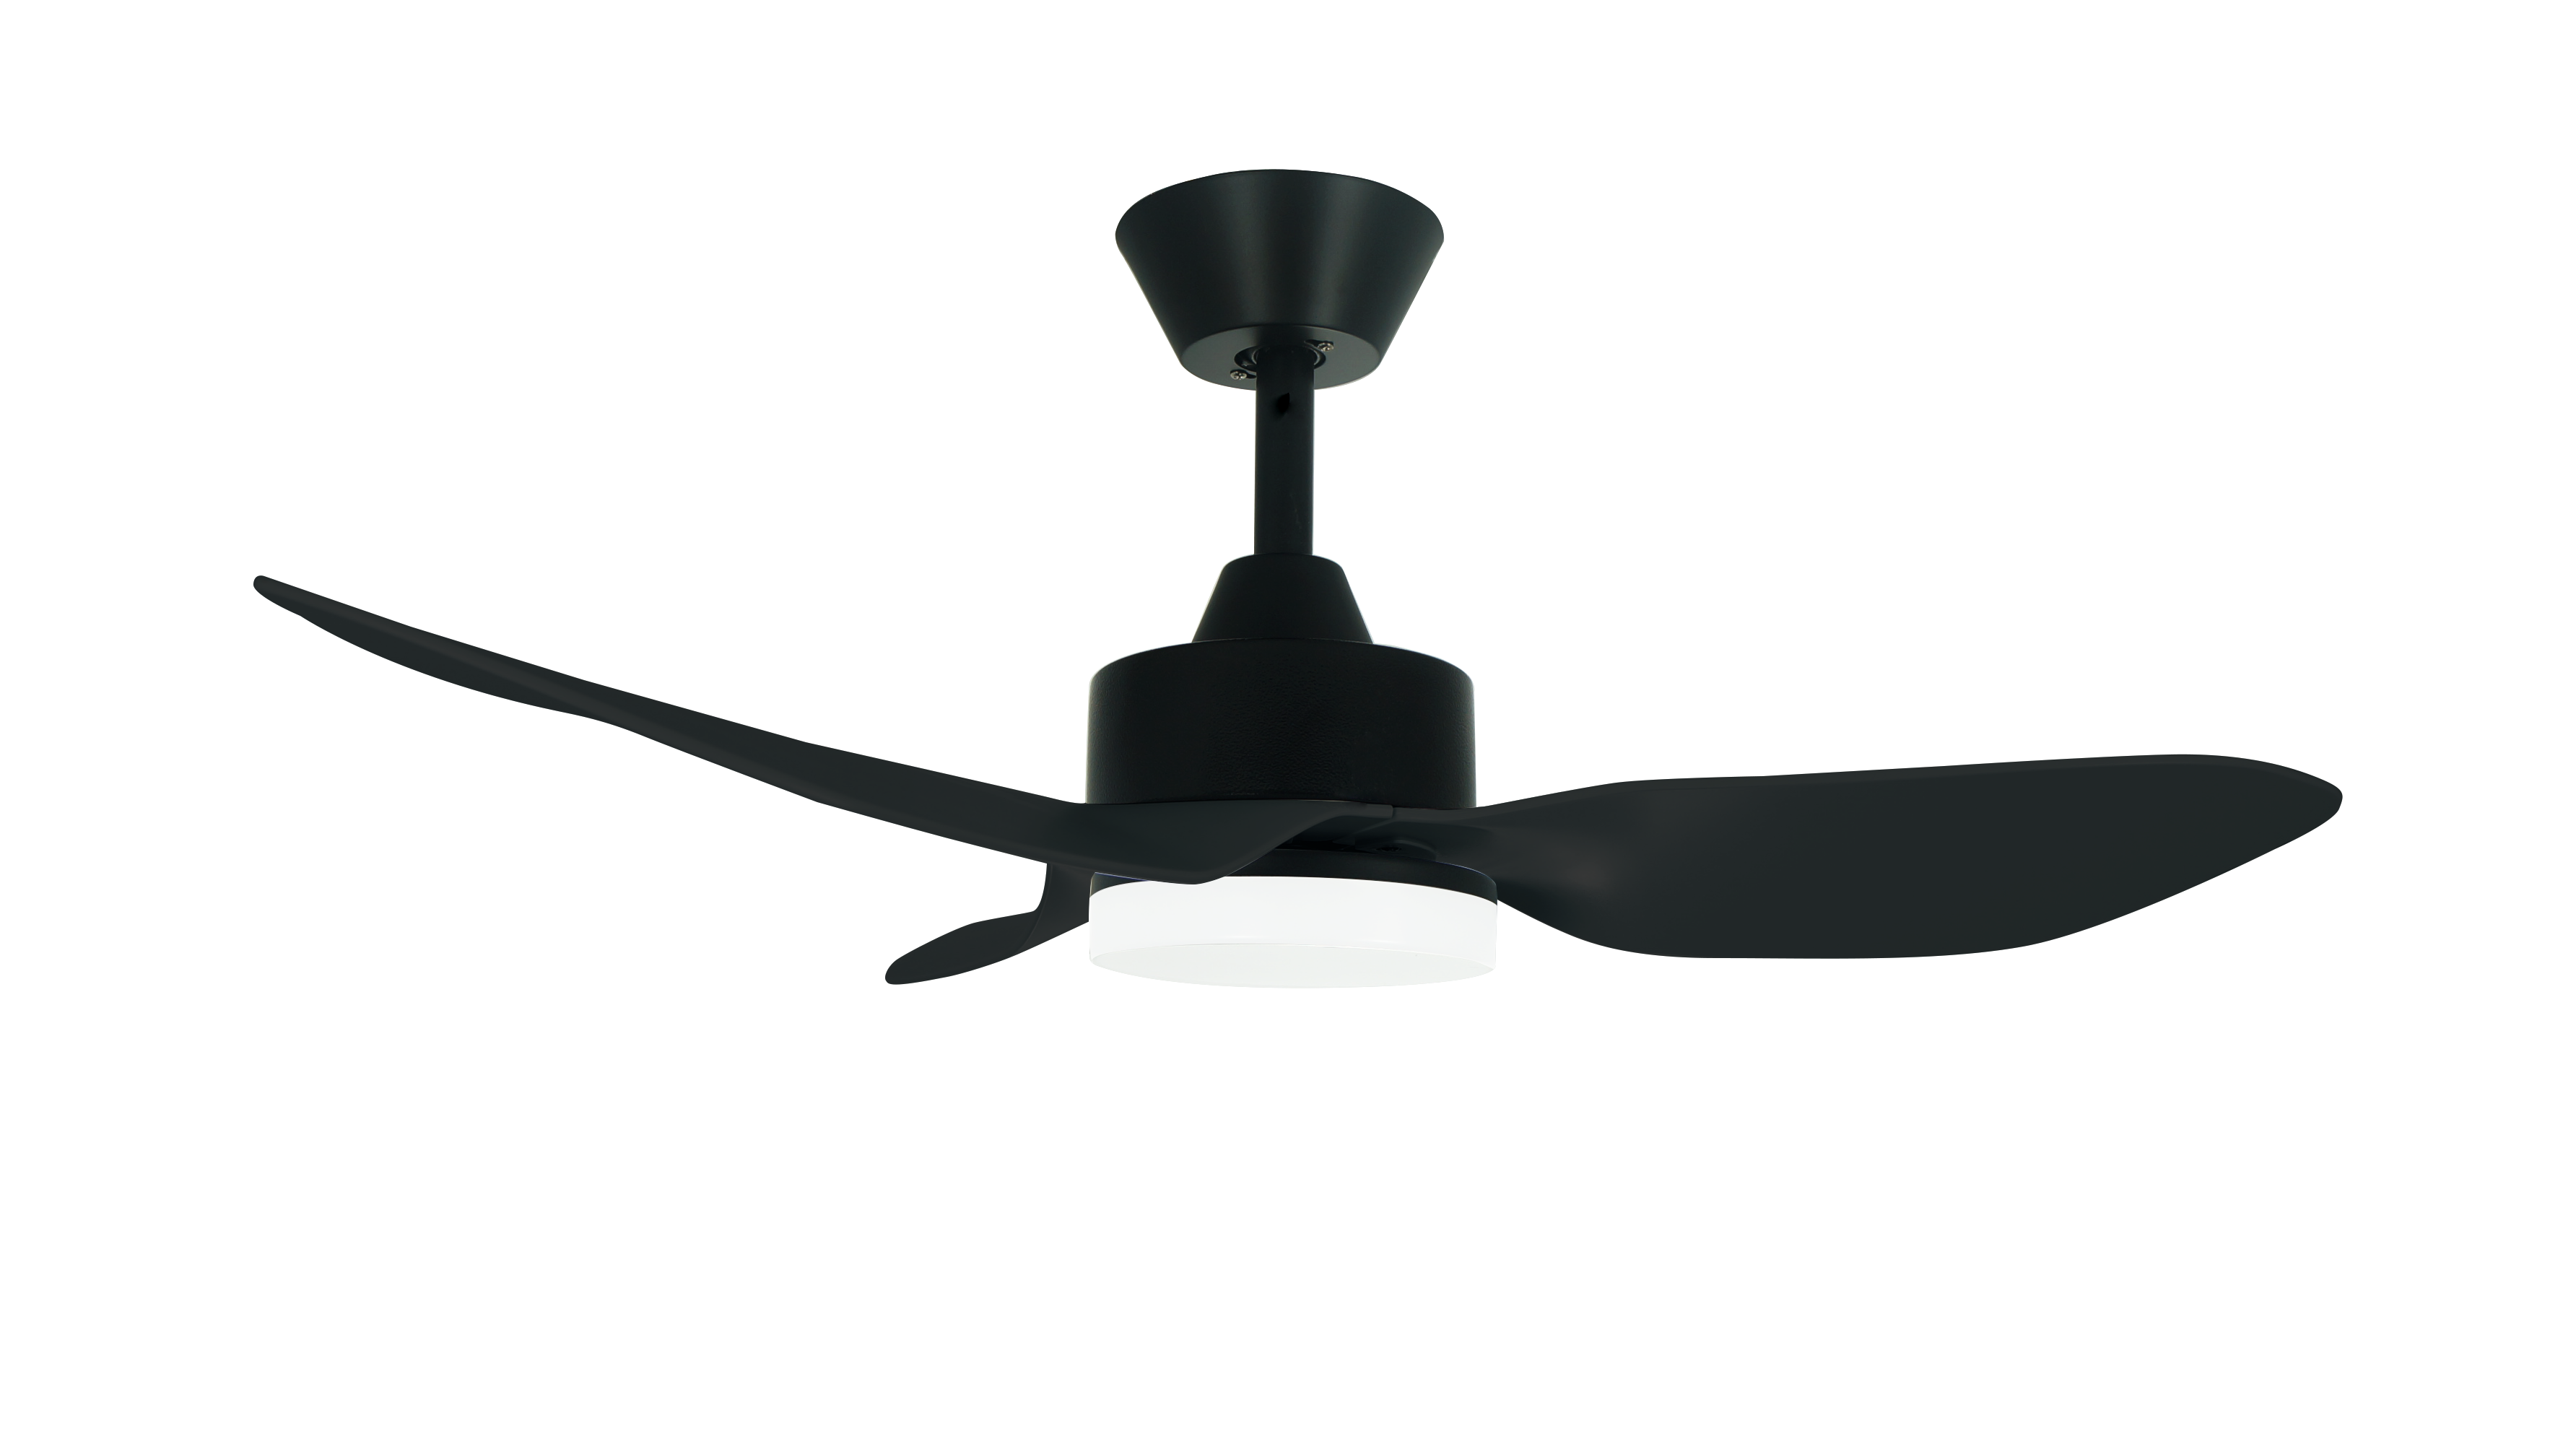 Airbena Ceiling Fan 36"ABS Fan Blade with And without Light for Household Ceiling Fans